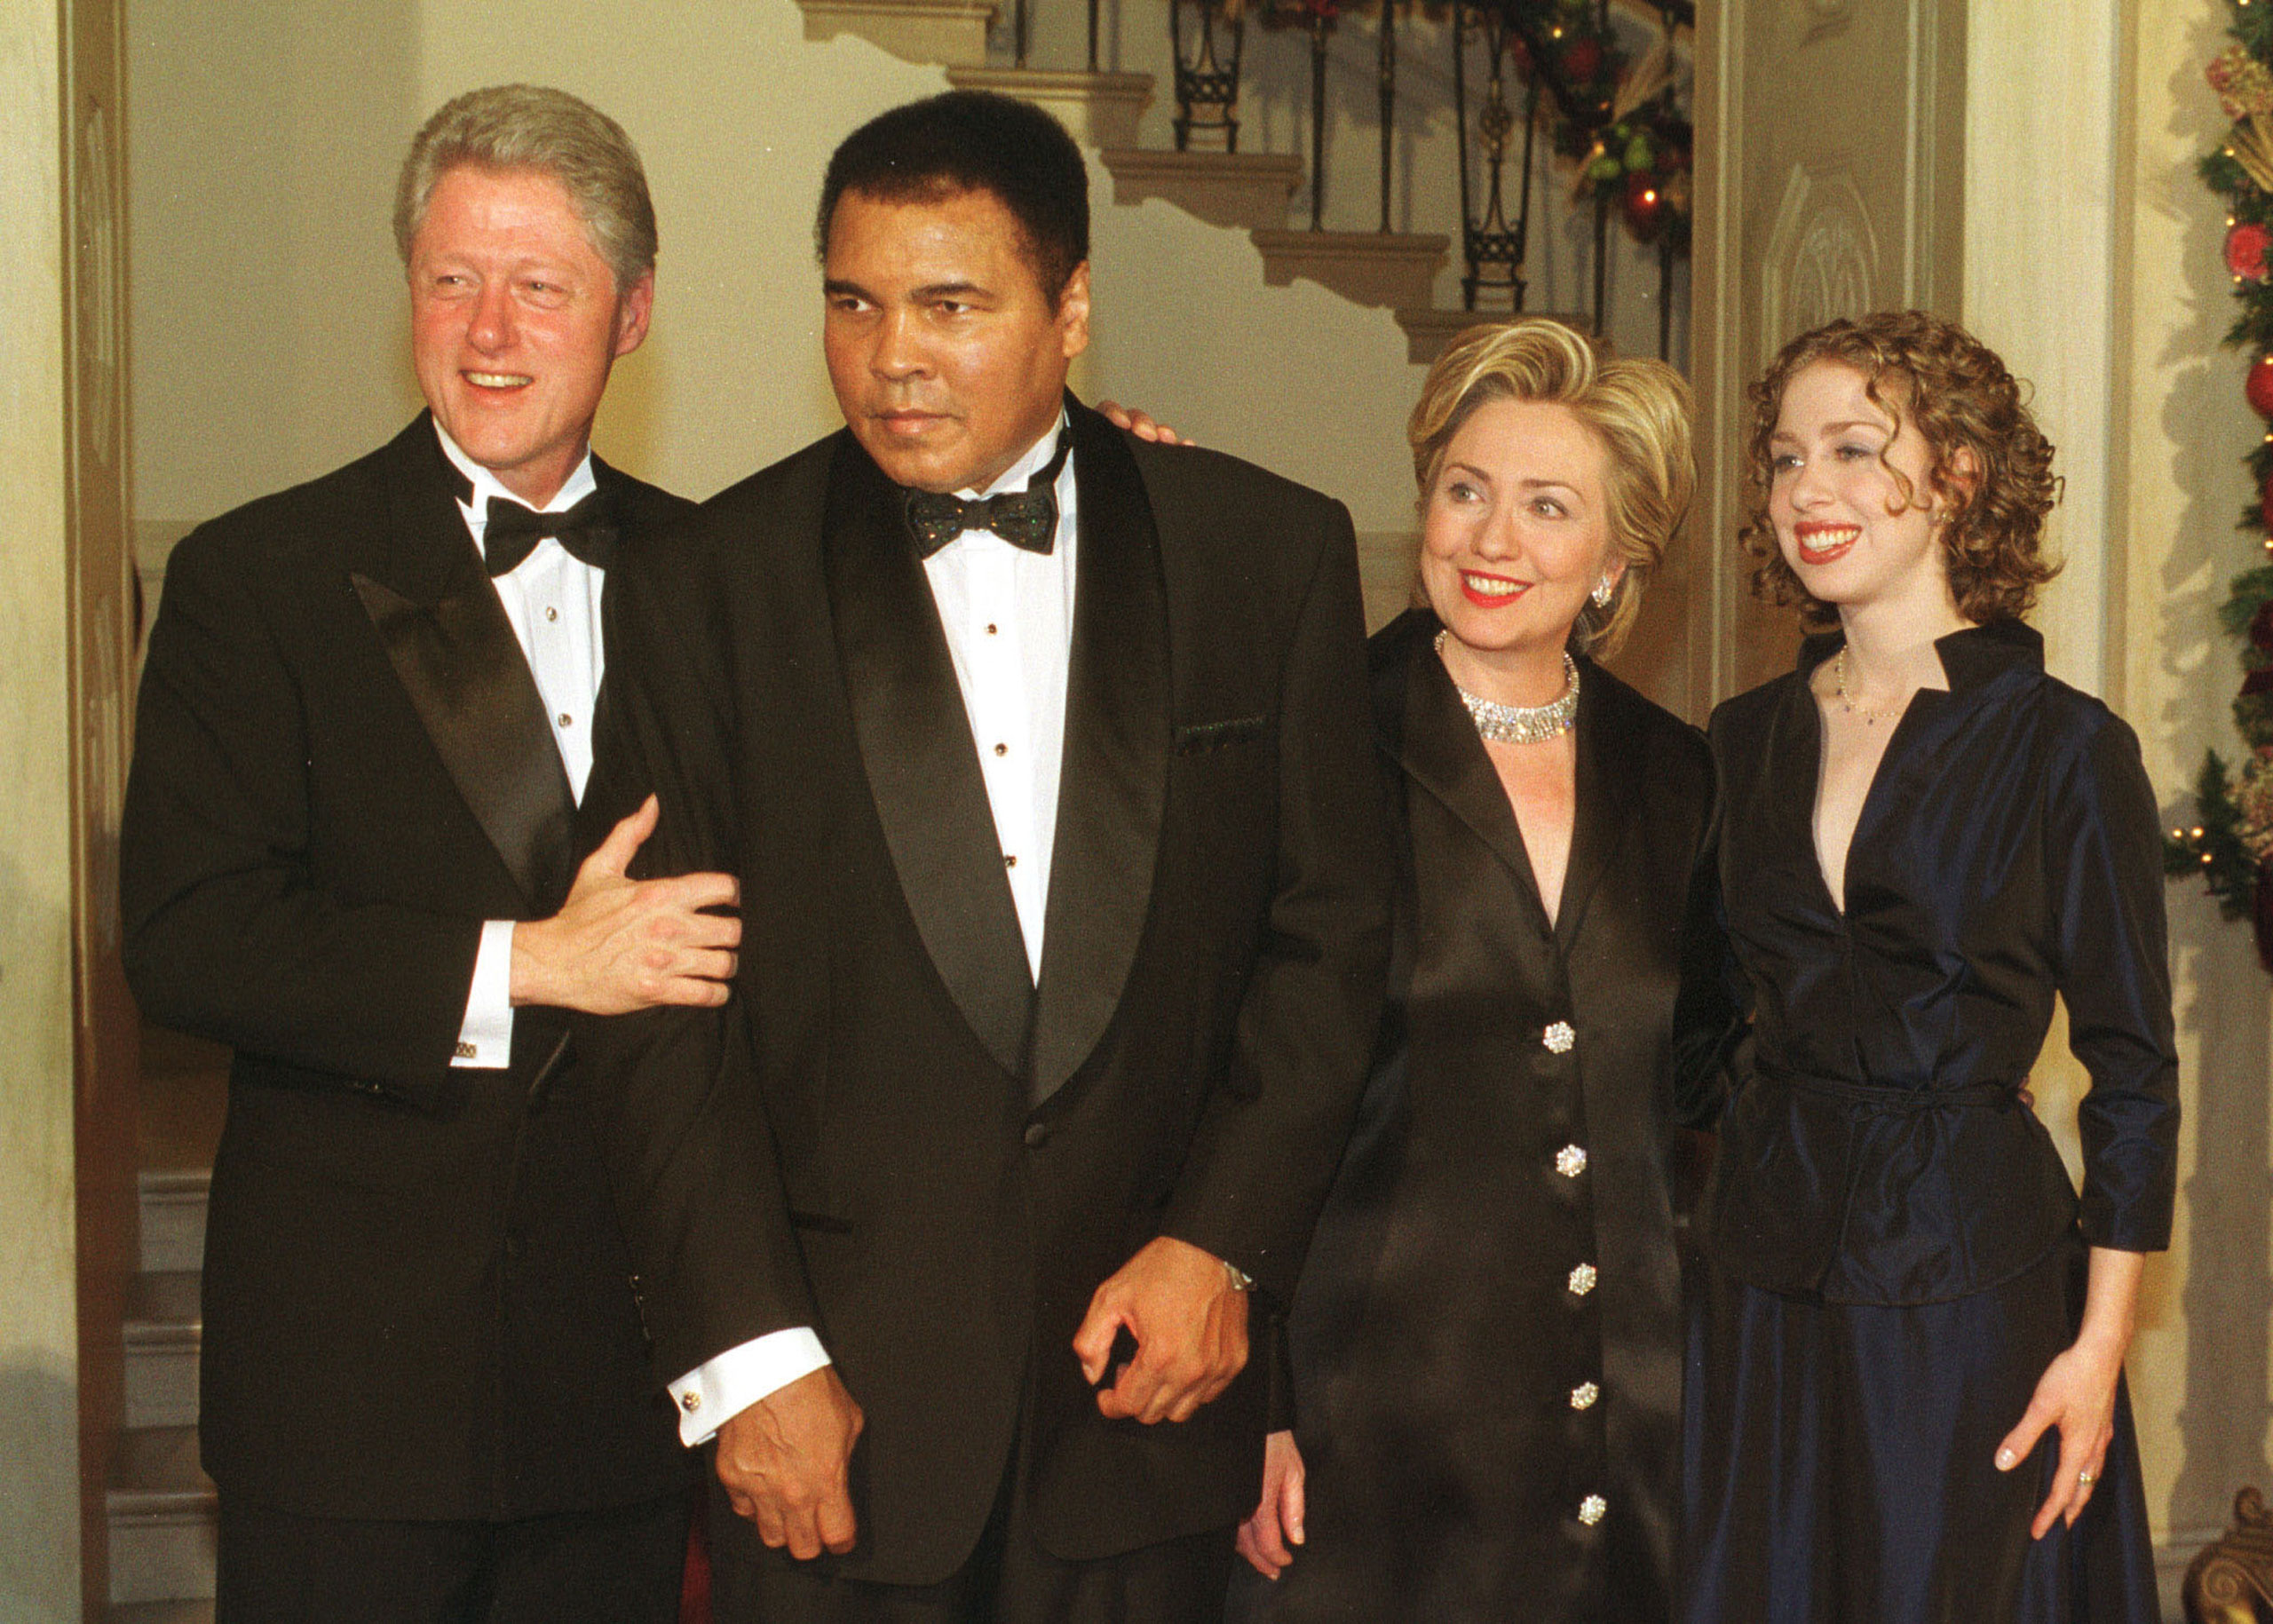 The former First Family poses for a photo with Muhammad Ali at the White House Millennium Dinner on Dec. 31, 1999.